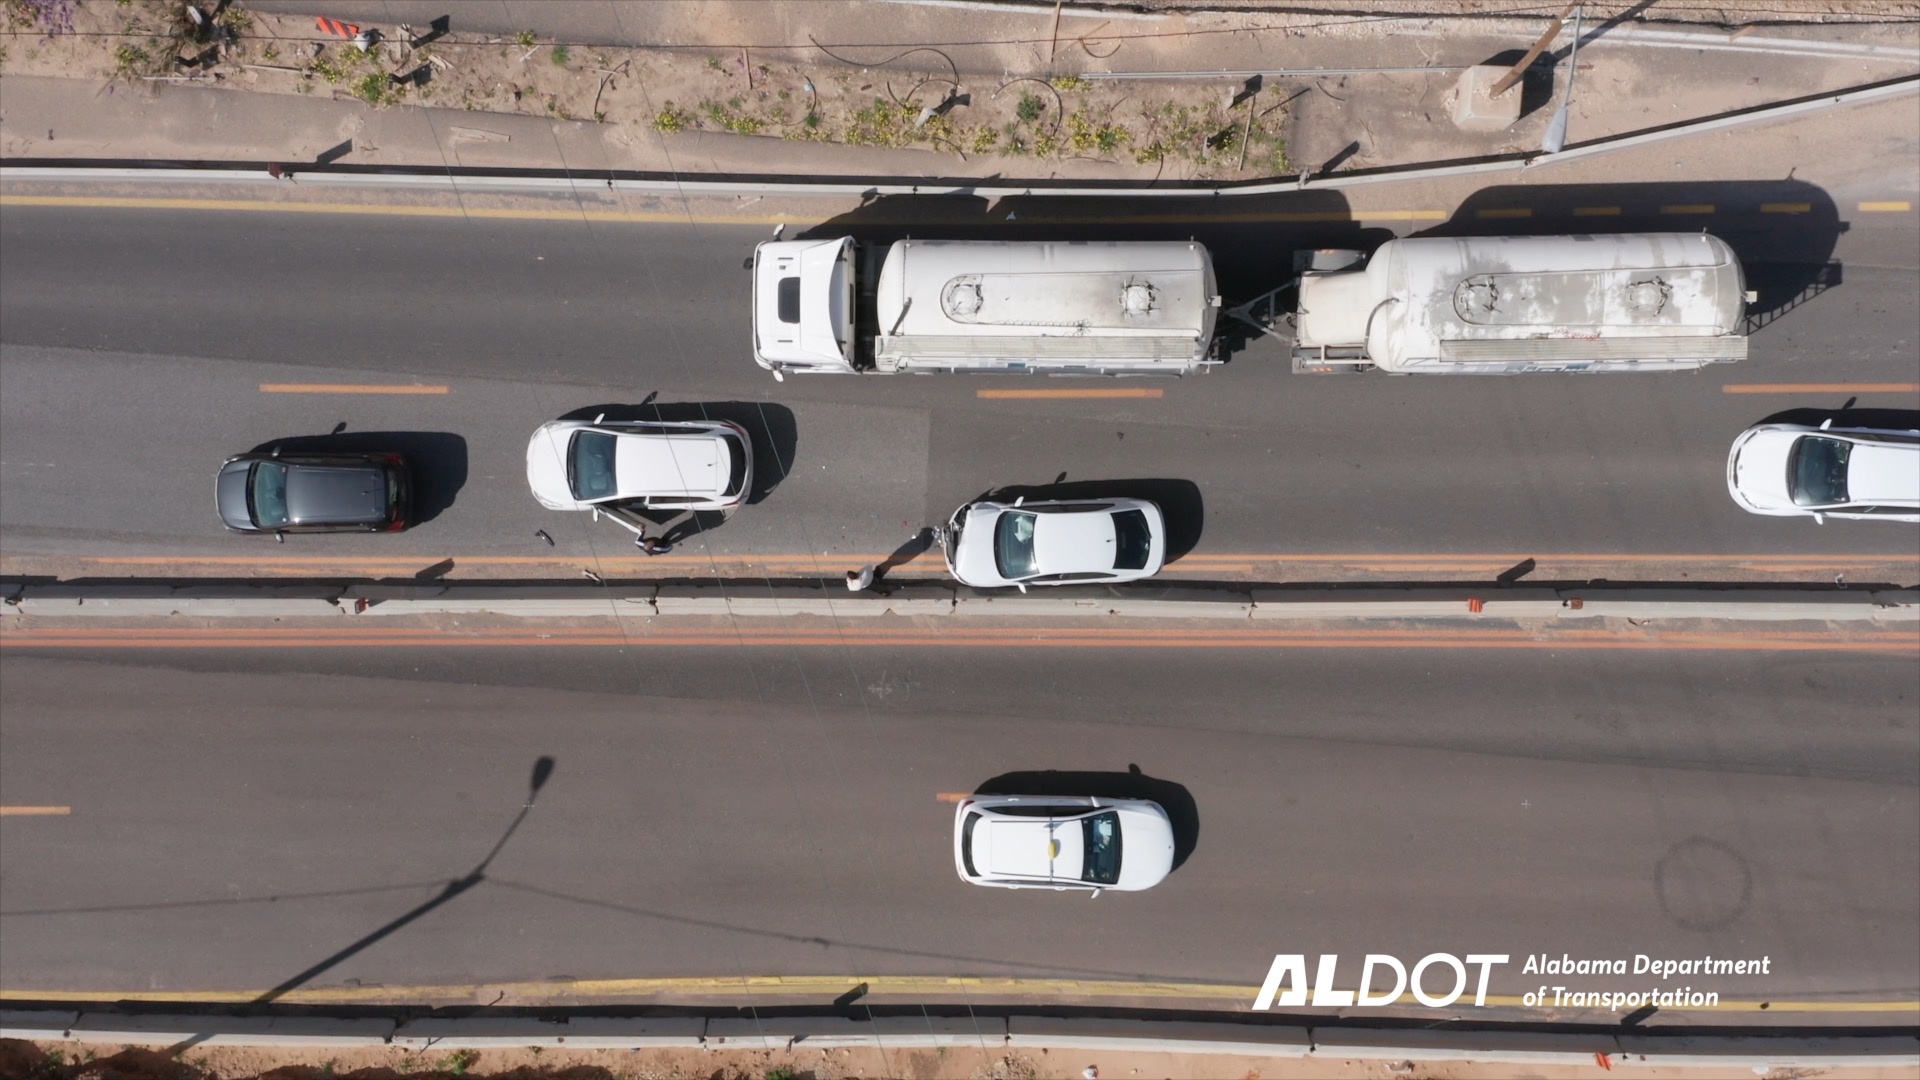 Trucks and cars traveling on a divided highway, as seen from above